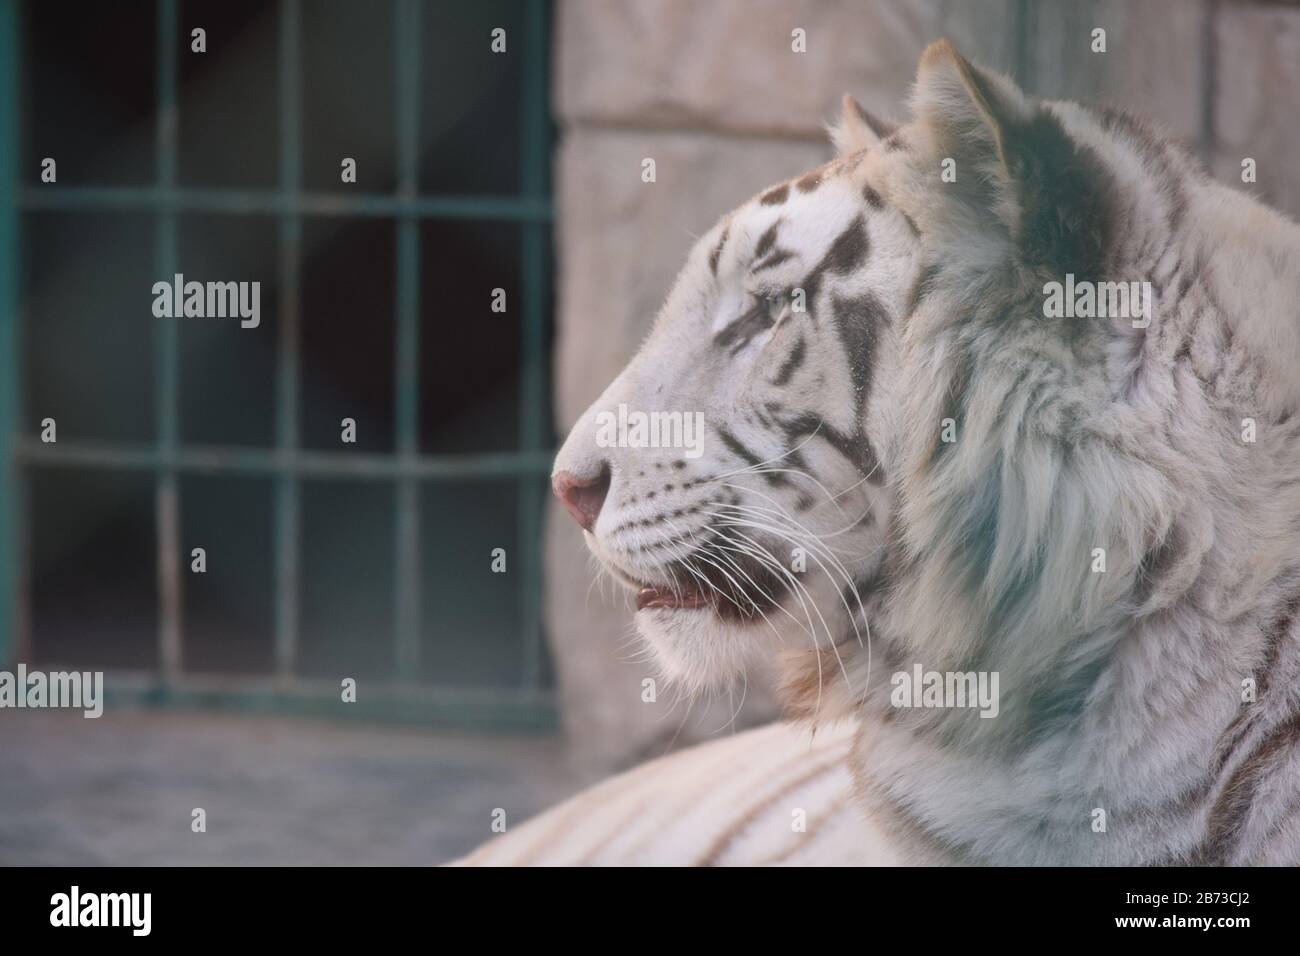 Close up view of white tiger Stock Photo